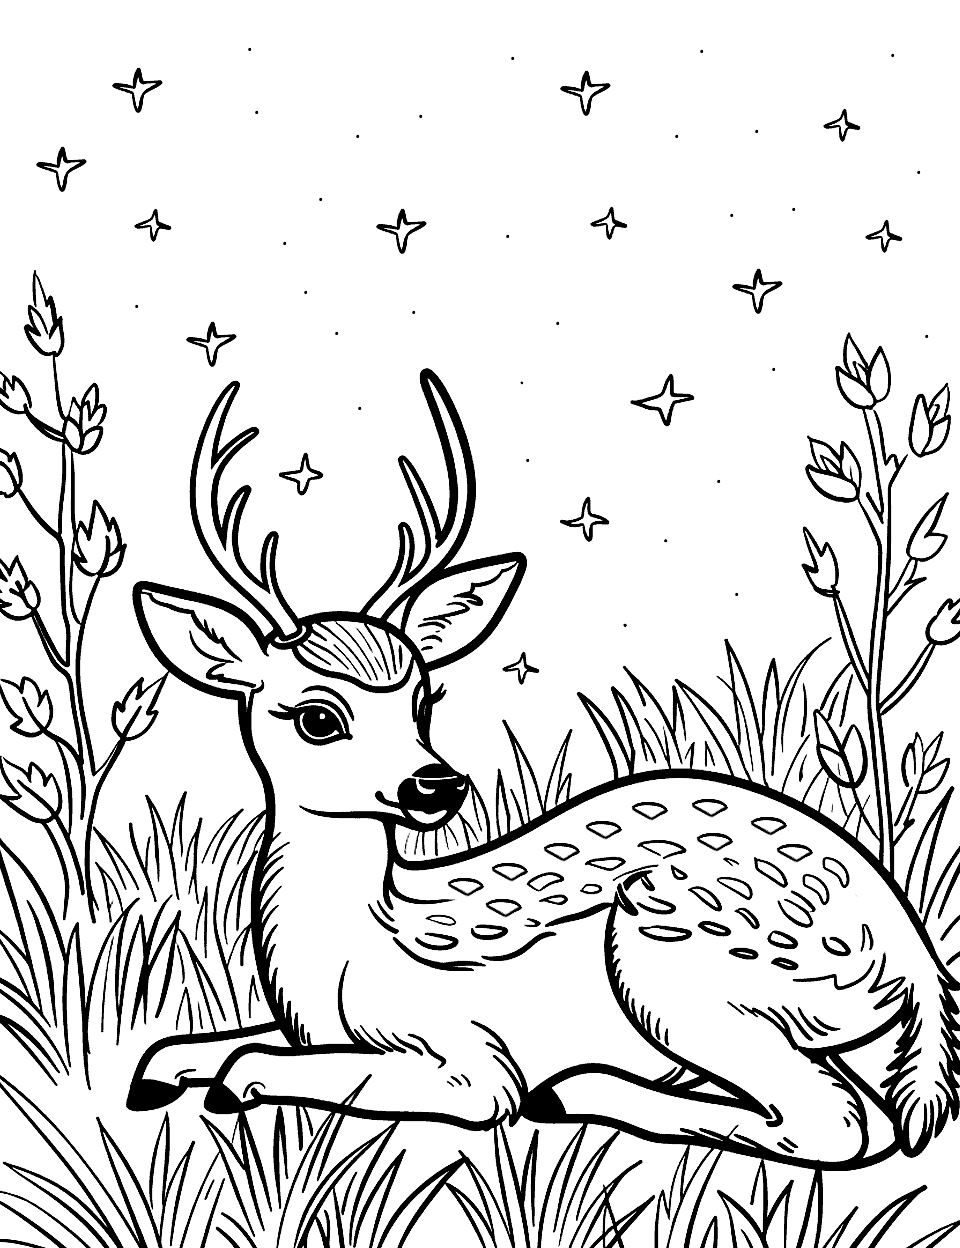 Fawn Under a Starry Night Coloring Page - A young fawn lying in grass under a sky full of stars.